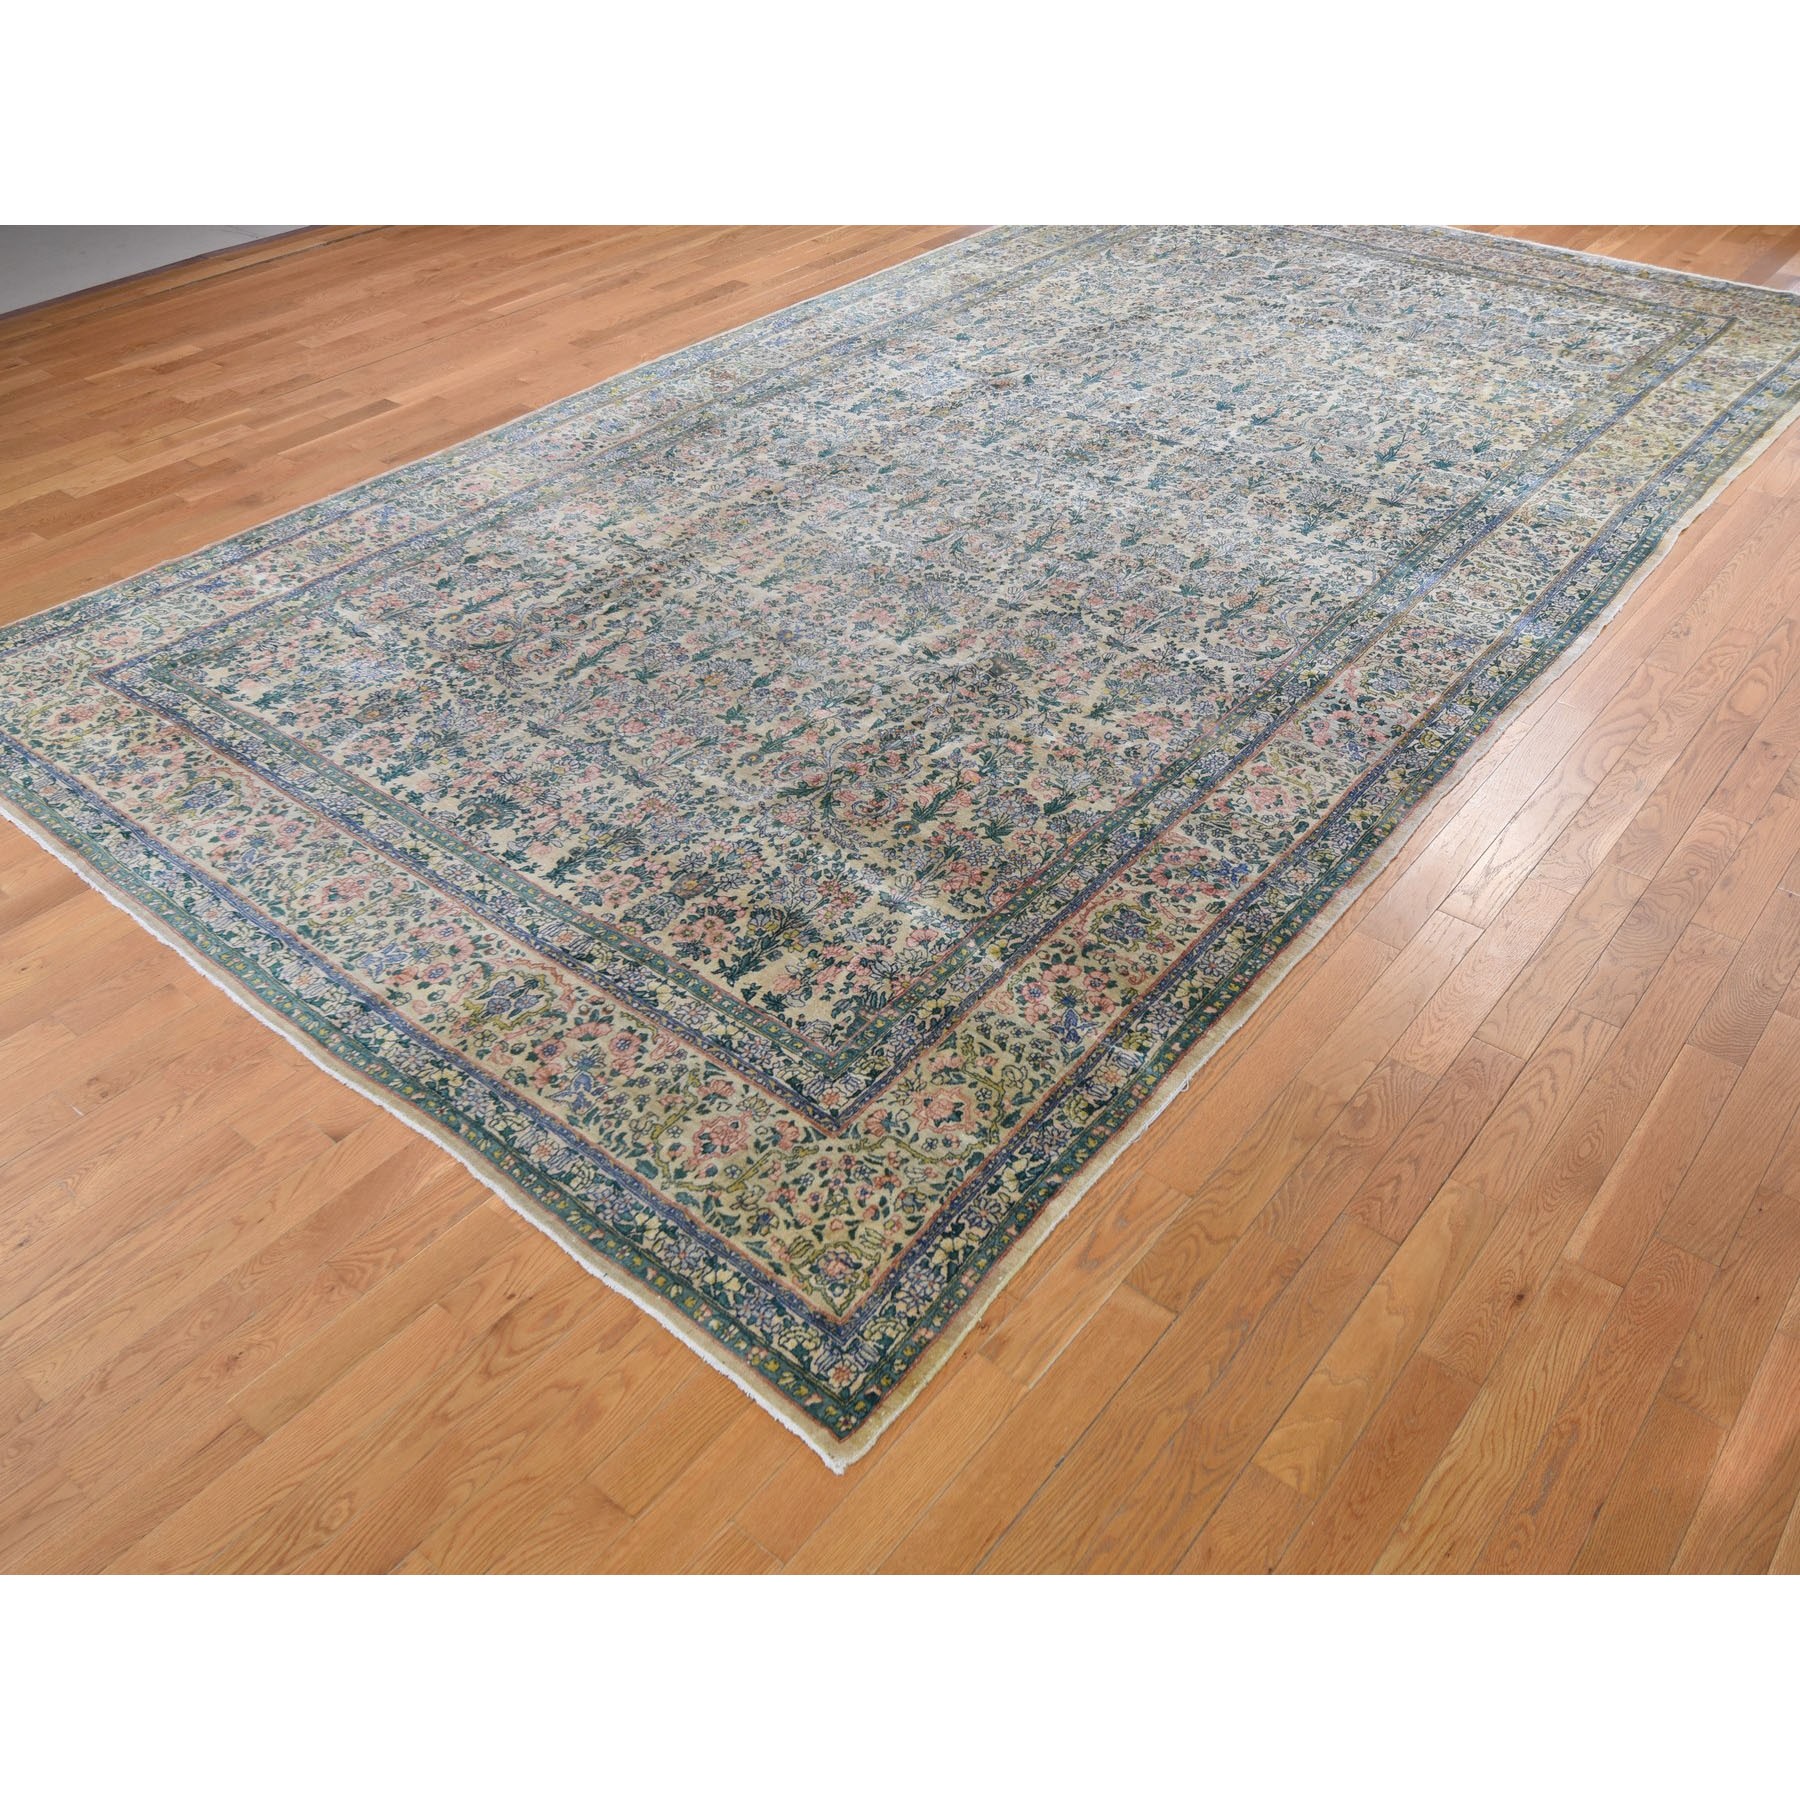 9-x16- Gallery Size Antique Persian Kerman Even Wear Hand Knotted Oriental Rug 